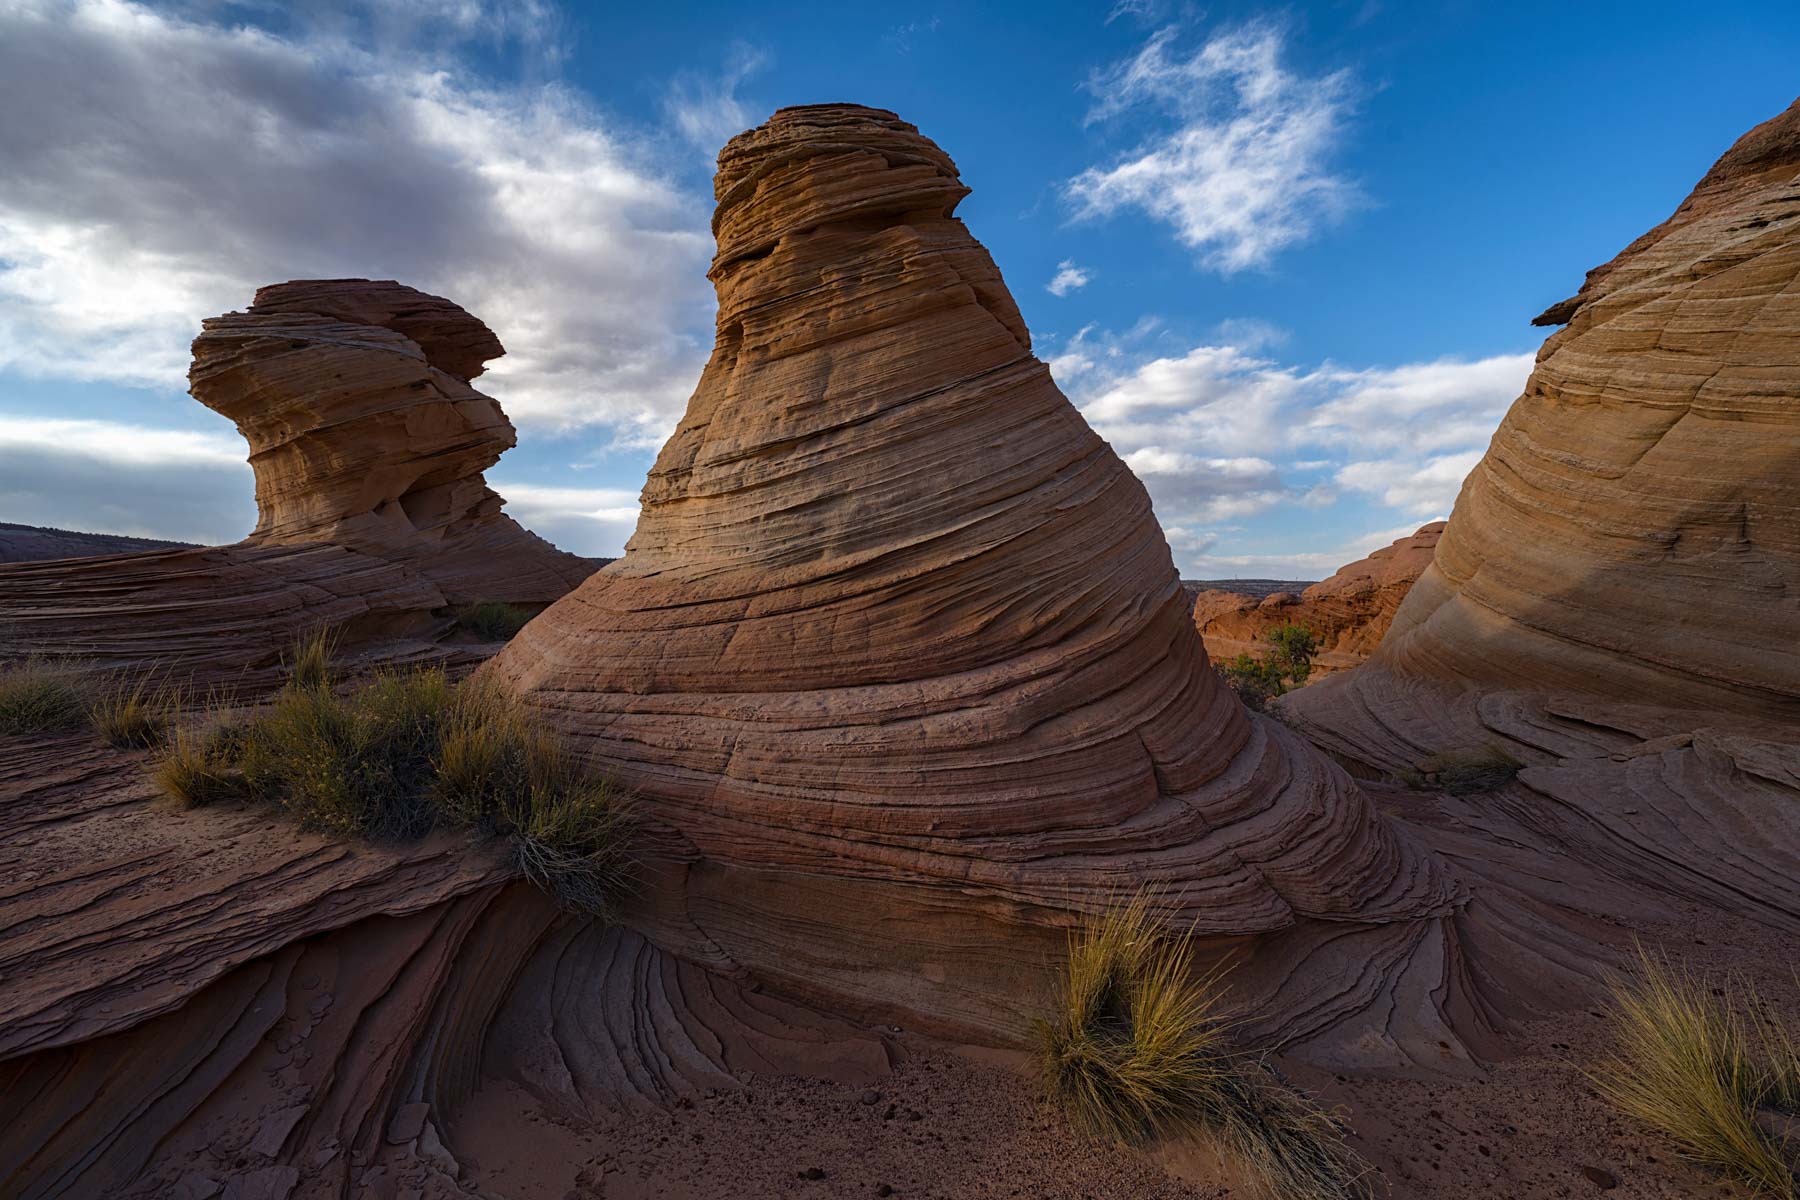 The Spiral Domes in Vermilion Cliffs National Monument